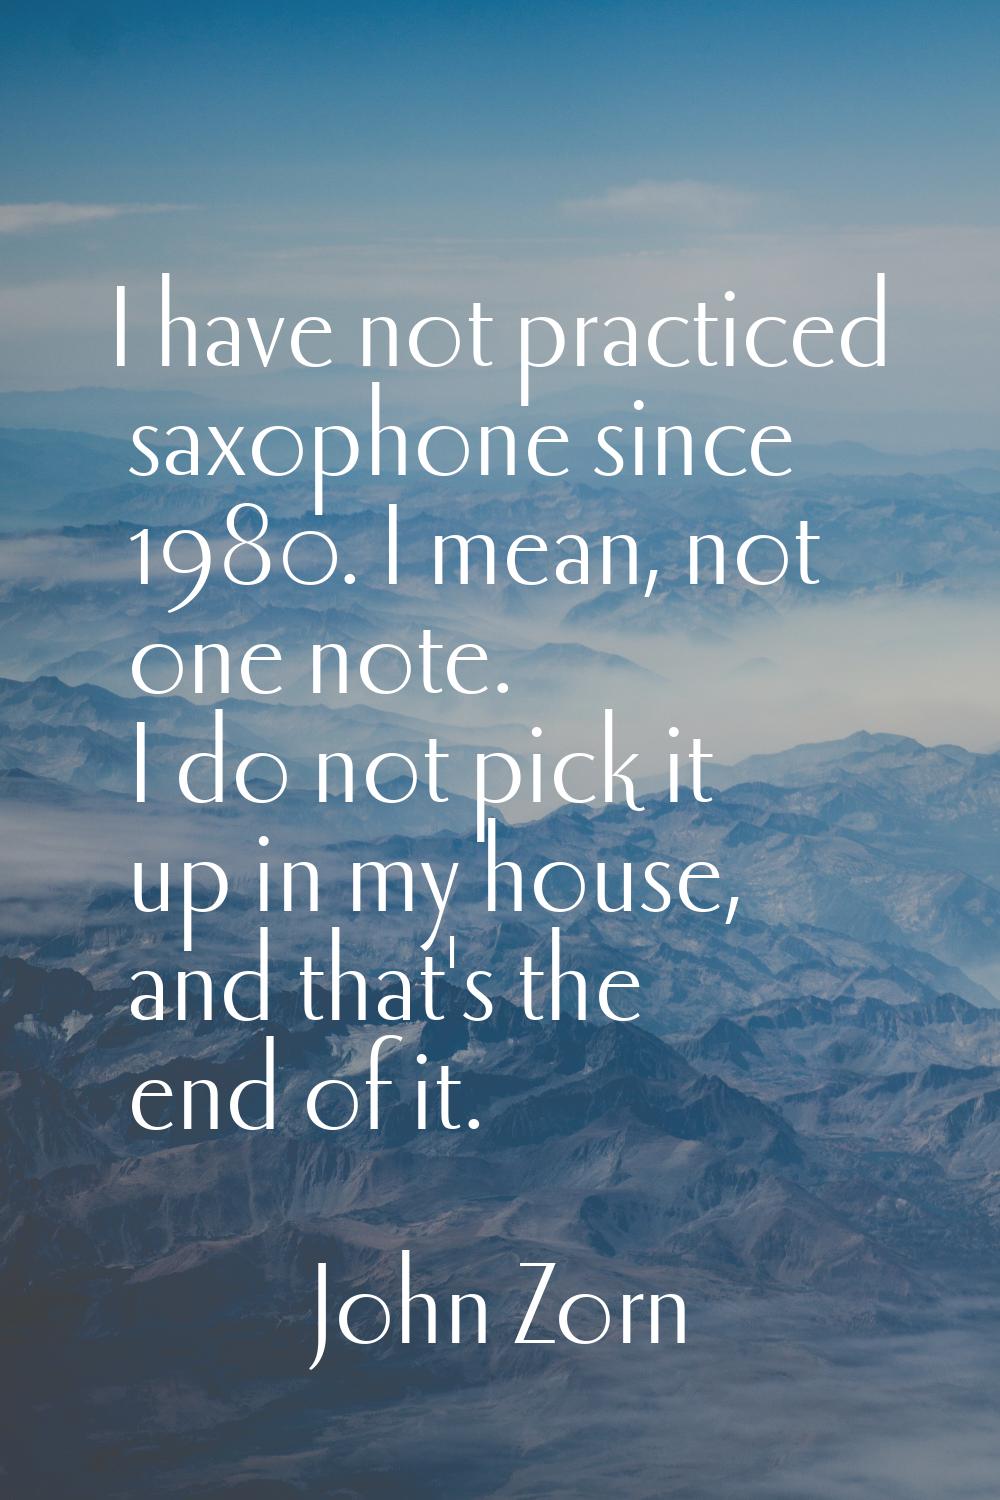 I have not practiced saxophone since 1980. I mean, not one note. I do not pick it up in my house, a